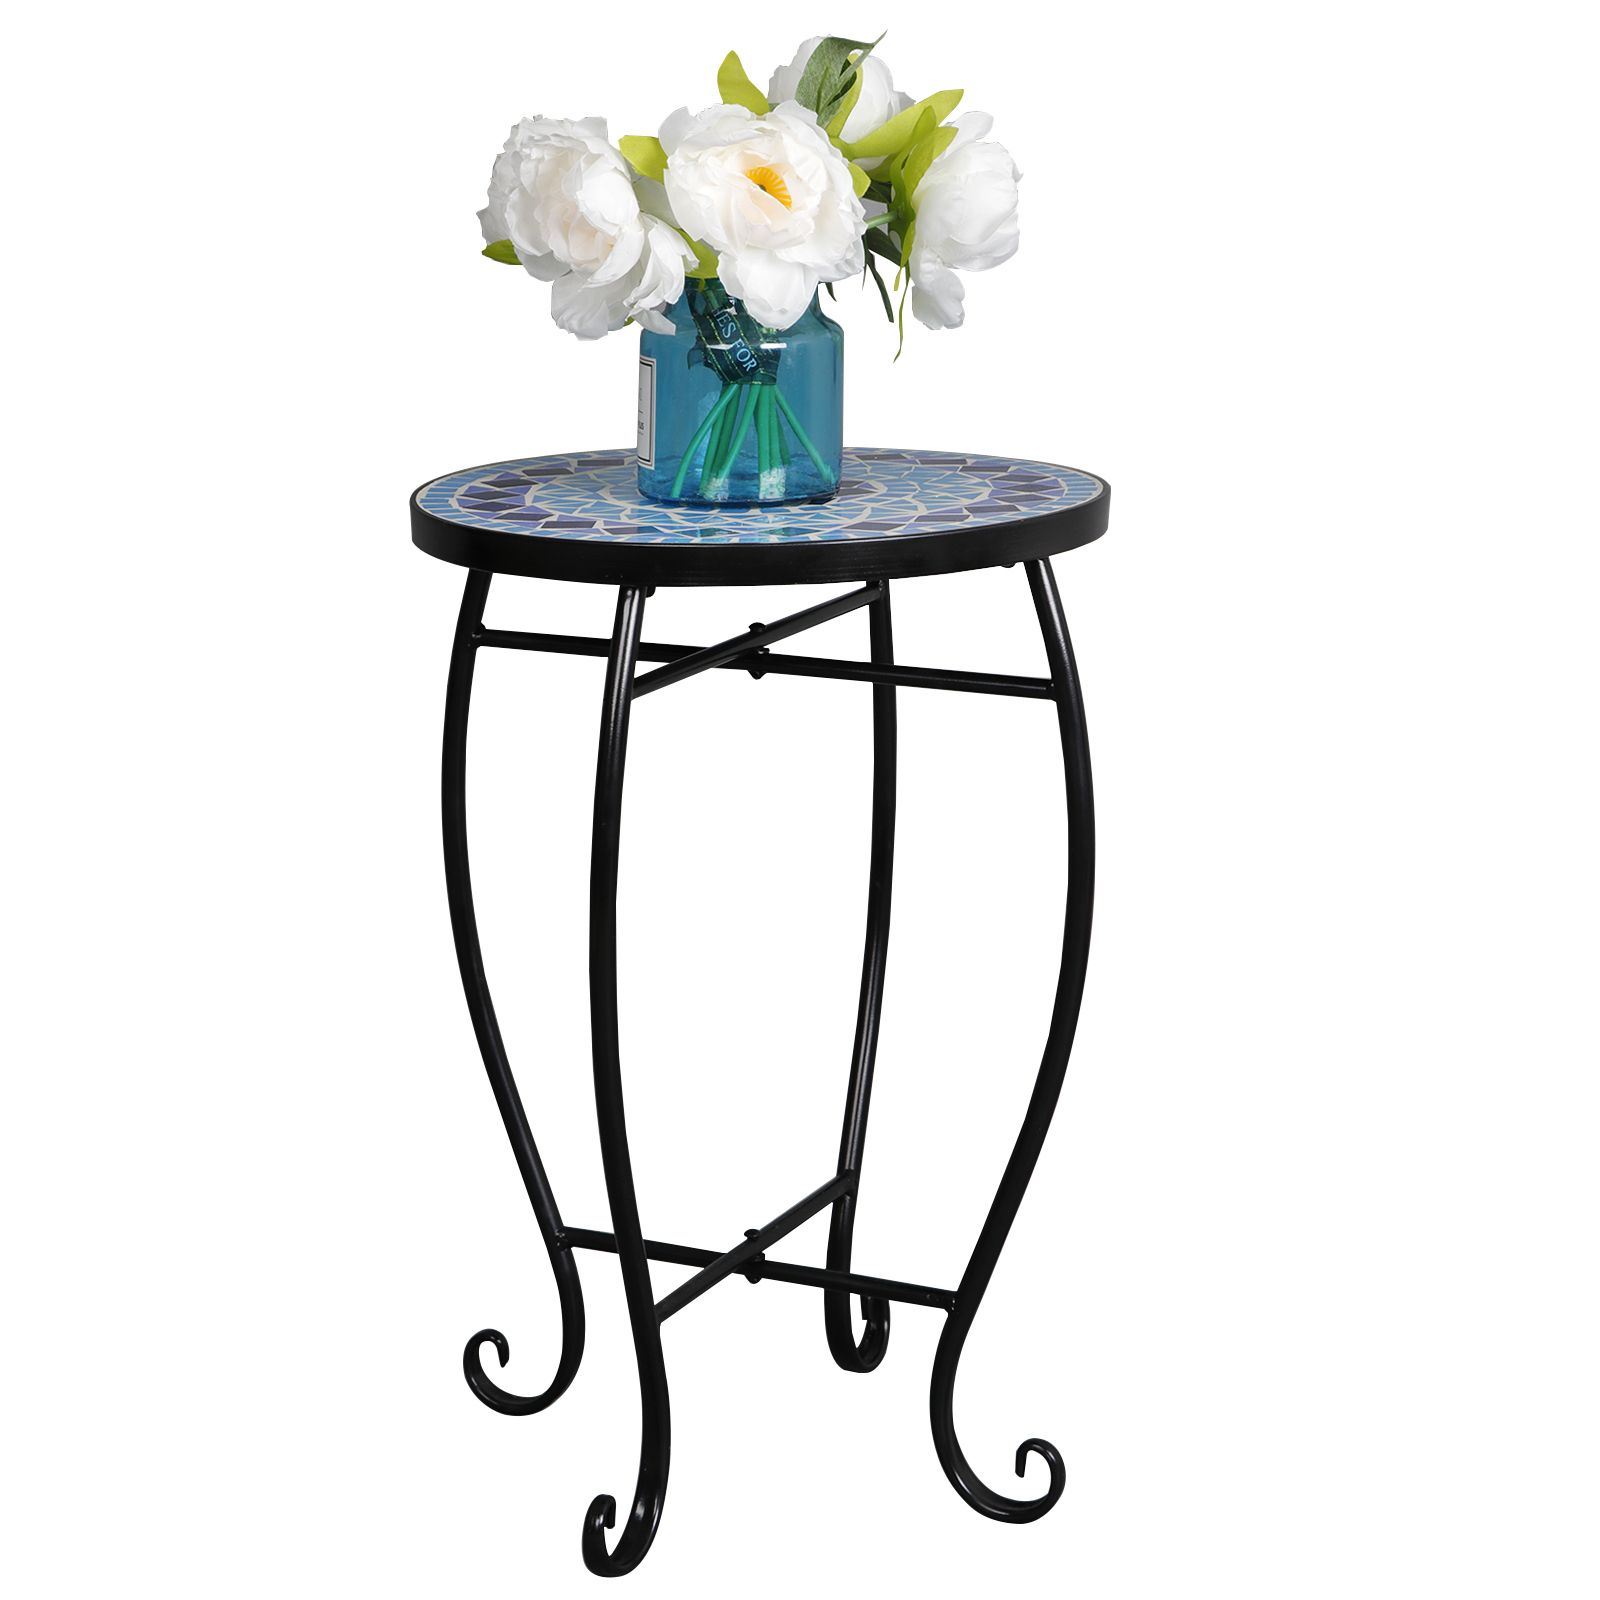 Zeny Mosaic Round Side Accent Table Patio Plant Stand Porch Beach Theme Pertaining To Mosaic Outdoor Accent Tables (View 7 of 15)